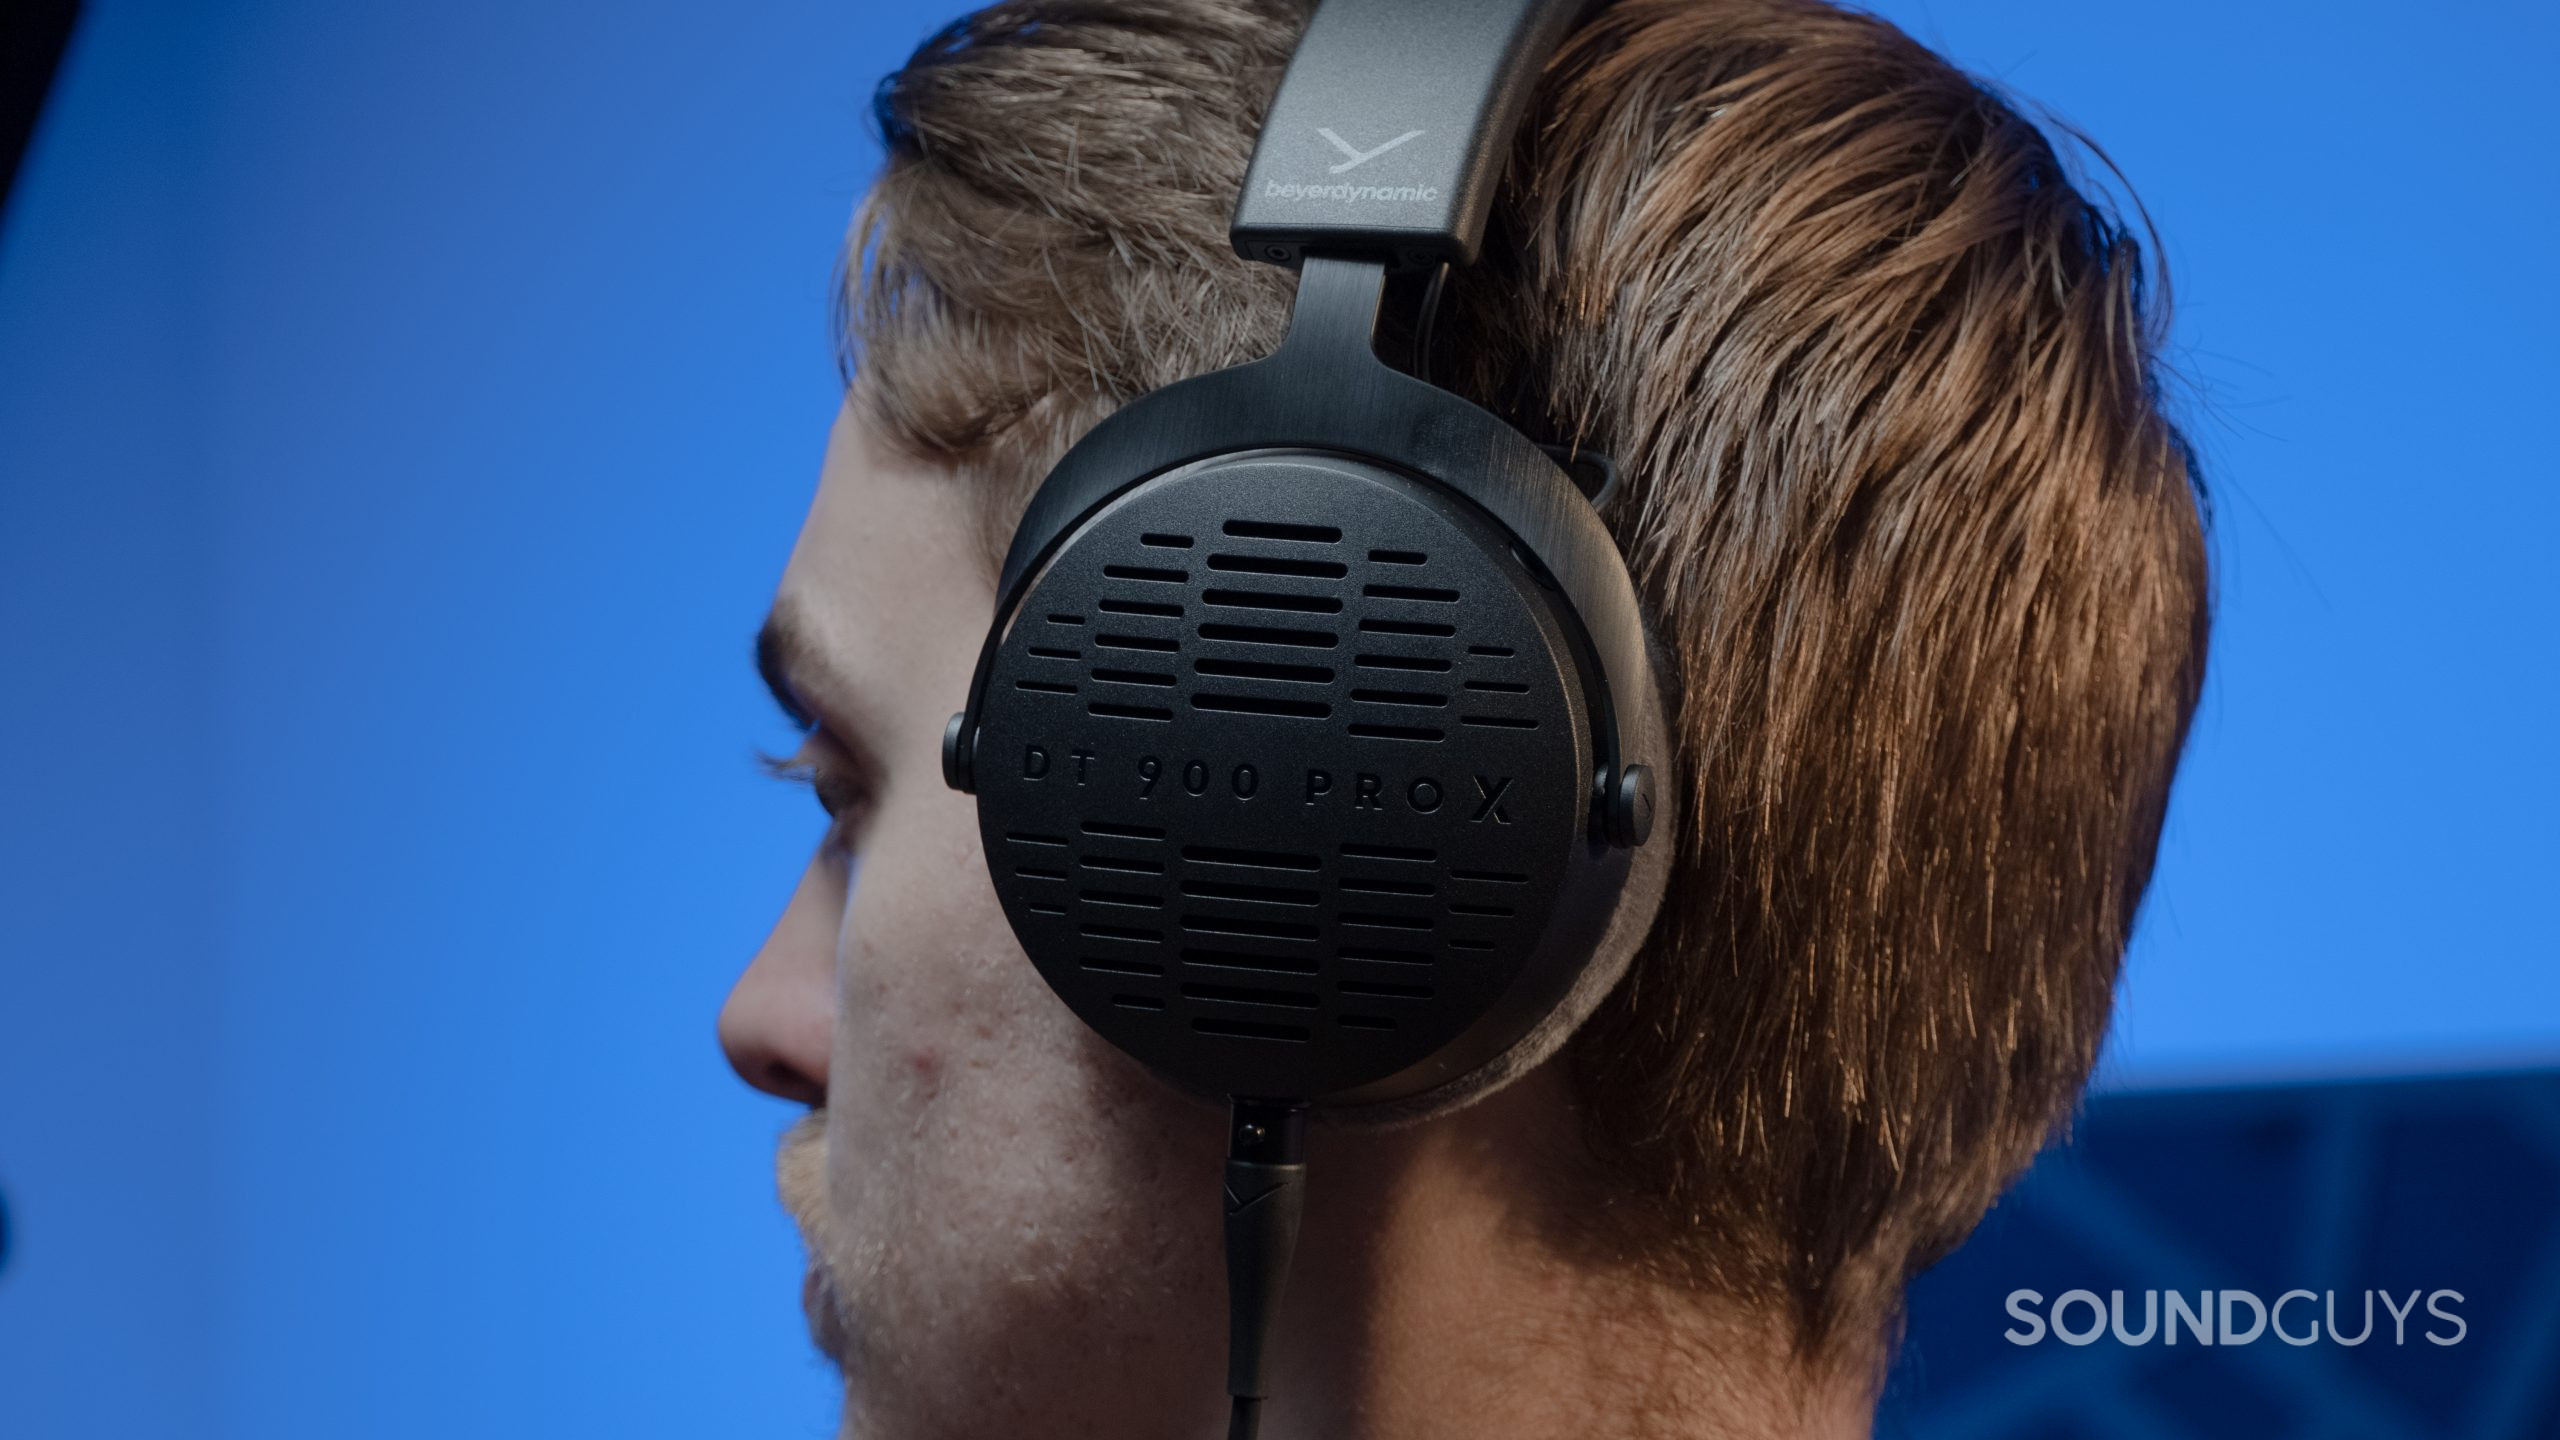 Beyerdynamic DT 880 PRO review: Great pro-sumer cans - SoundGuys